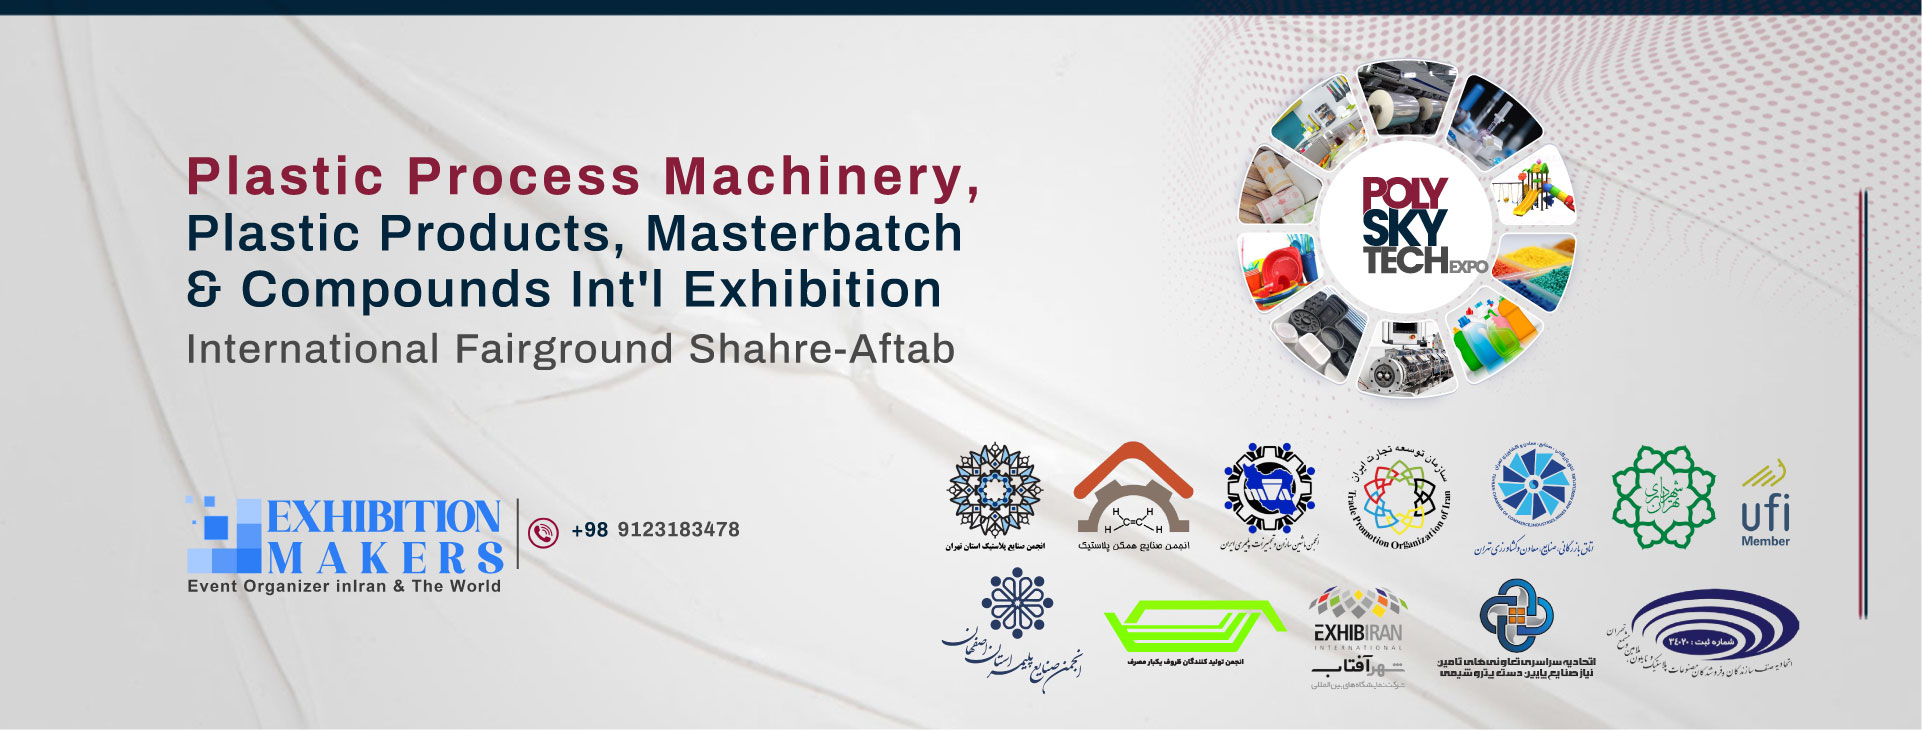 Plastic Process Machinery, Plastic Products, Masterbatch & Compounds Exhibition of Tehran Iran